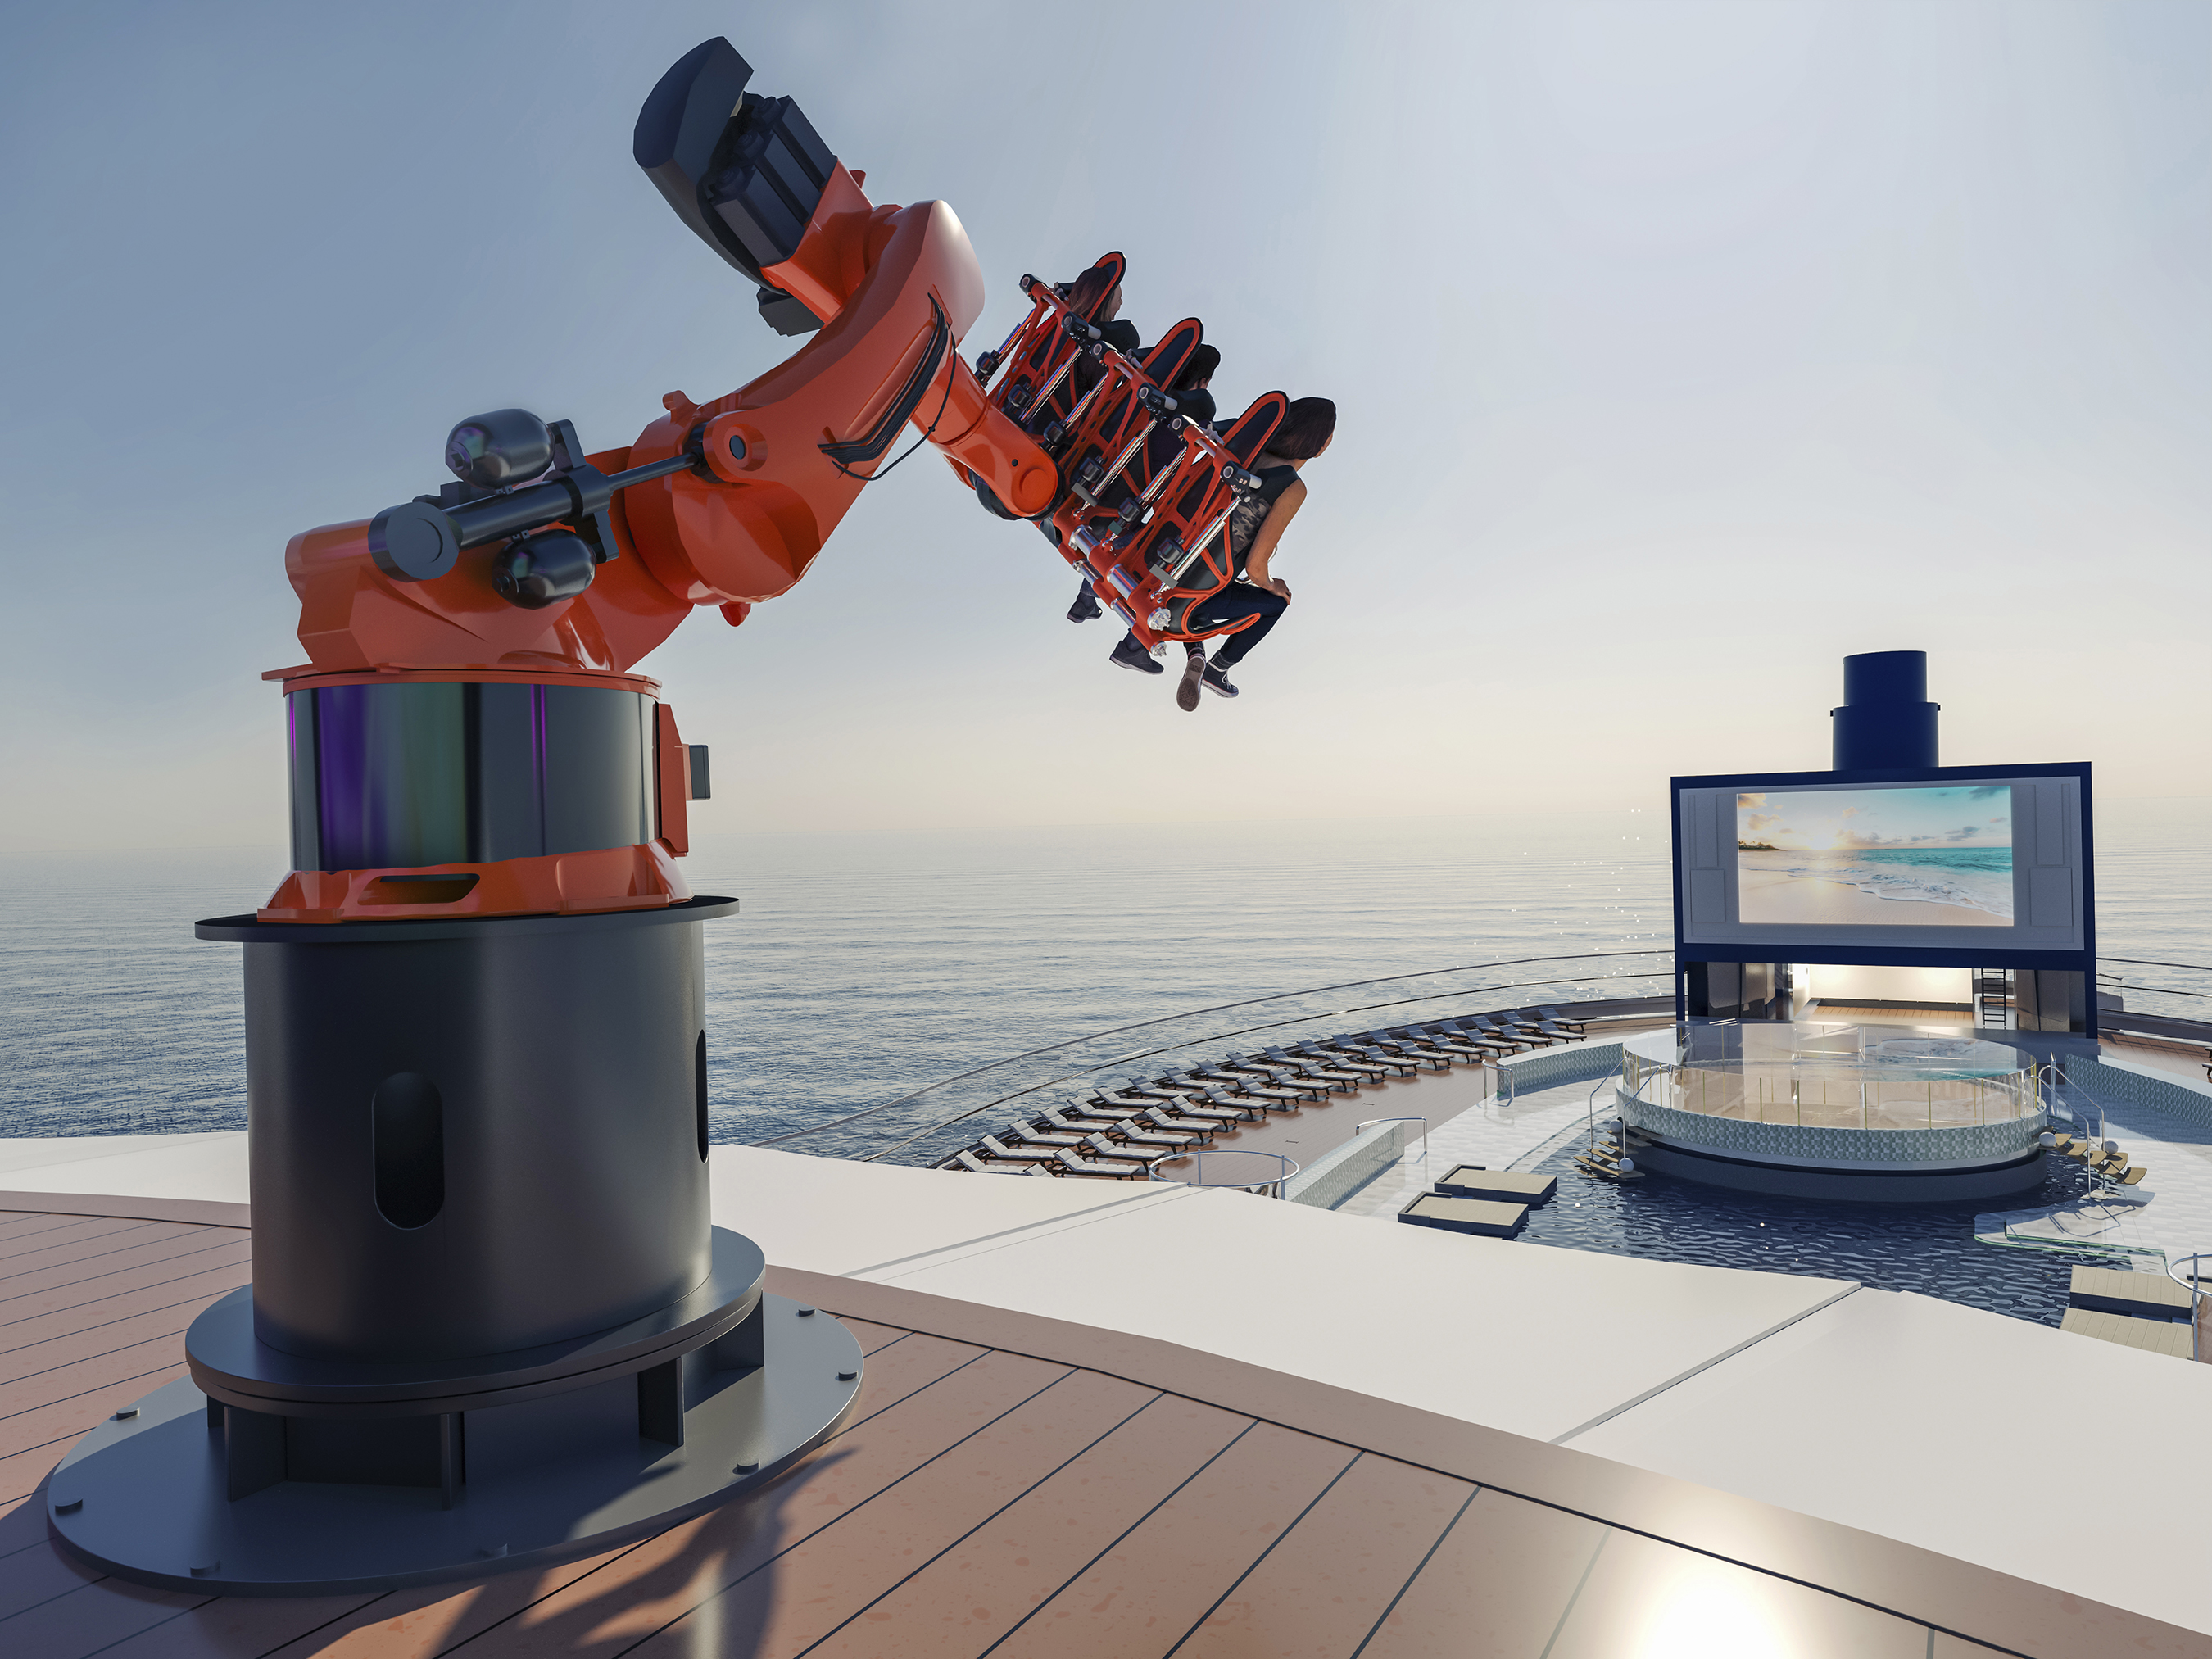 MSC Cruises’ ROBOTRON will be the first robotic arm ride at sea.